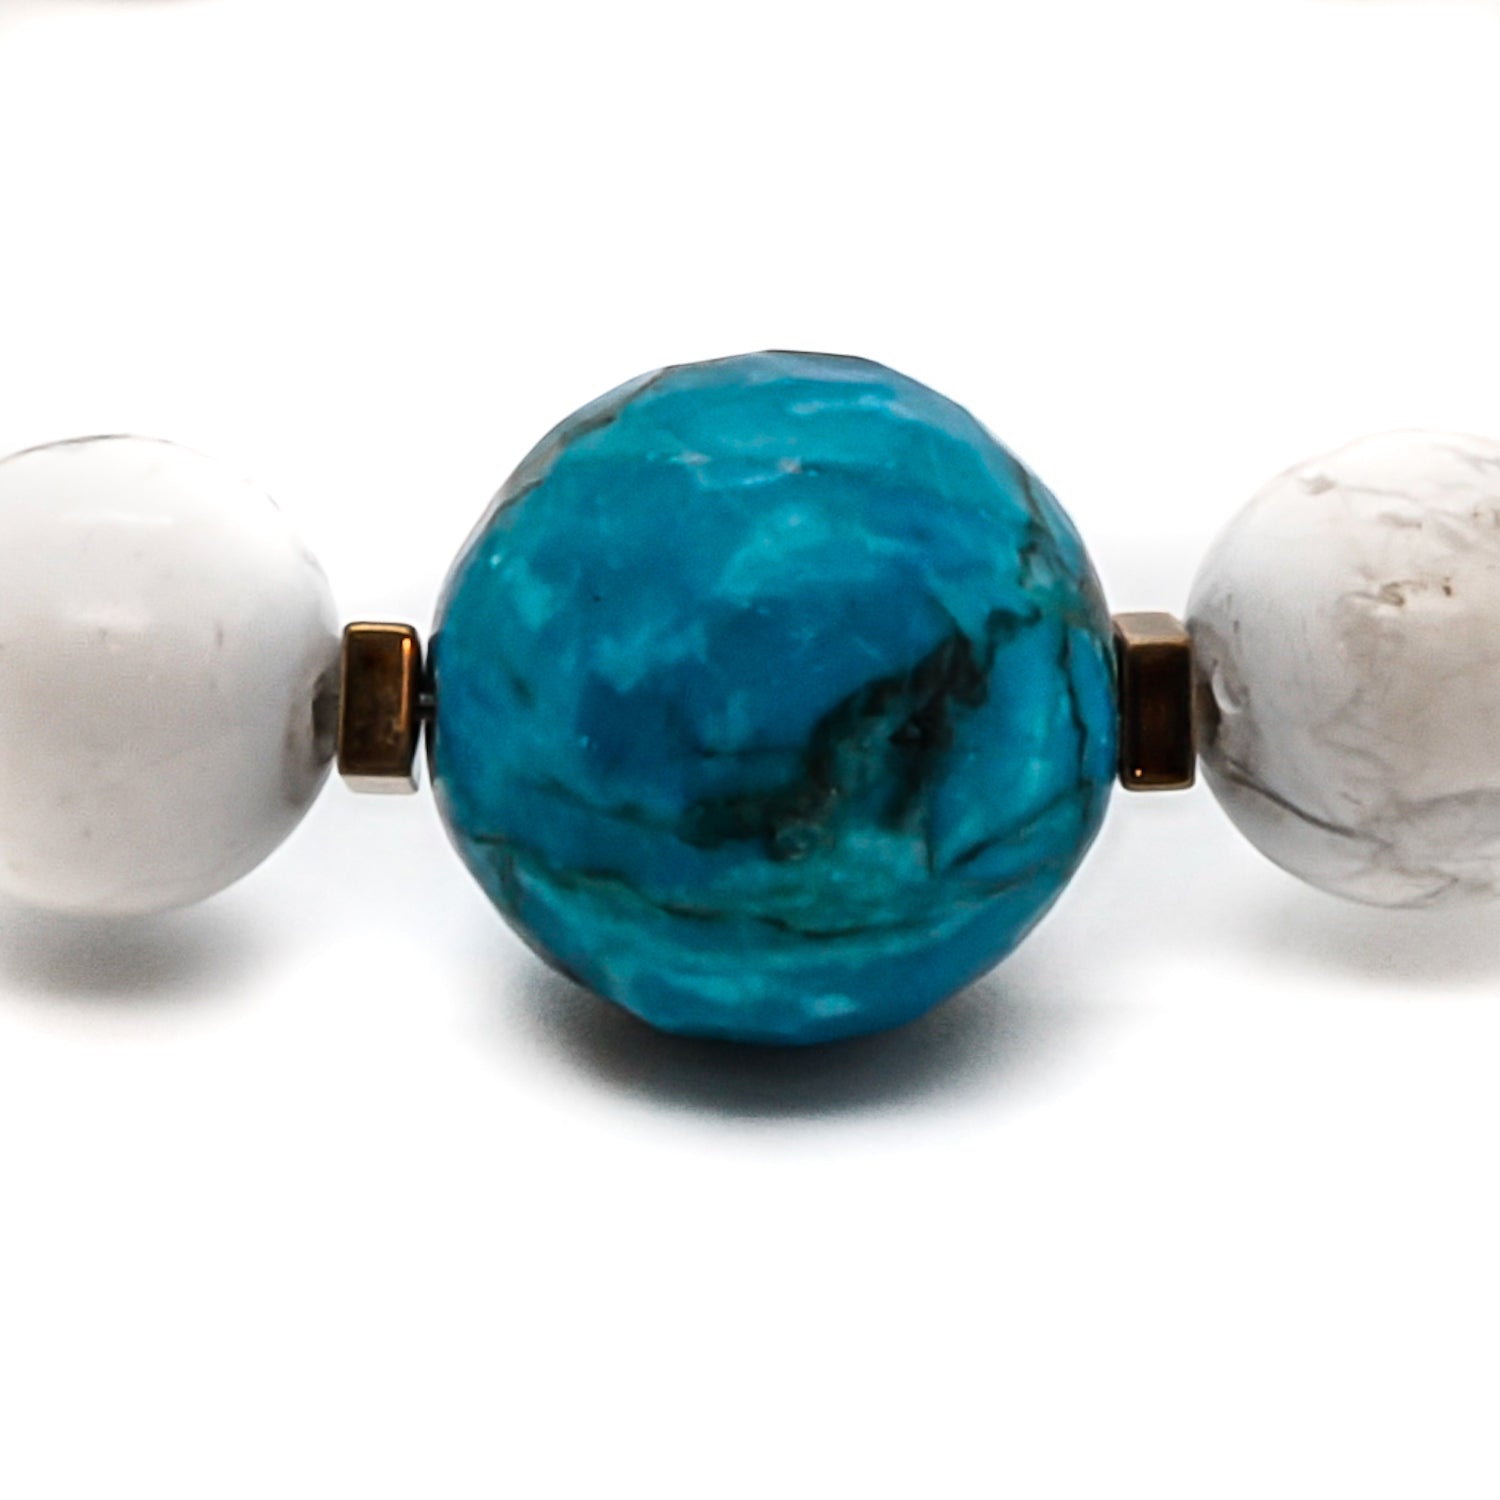 Discover the harmonious combination of turquoise, howlite, and red coral in the elegant Turquoise Balance Bracelet.